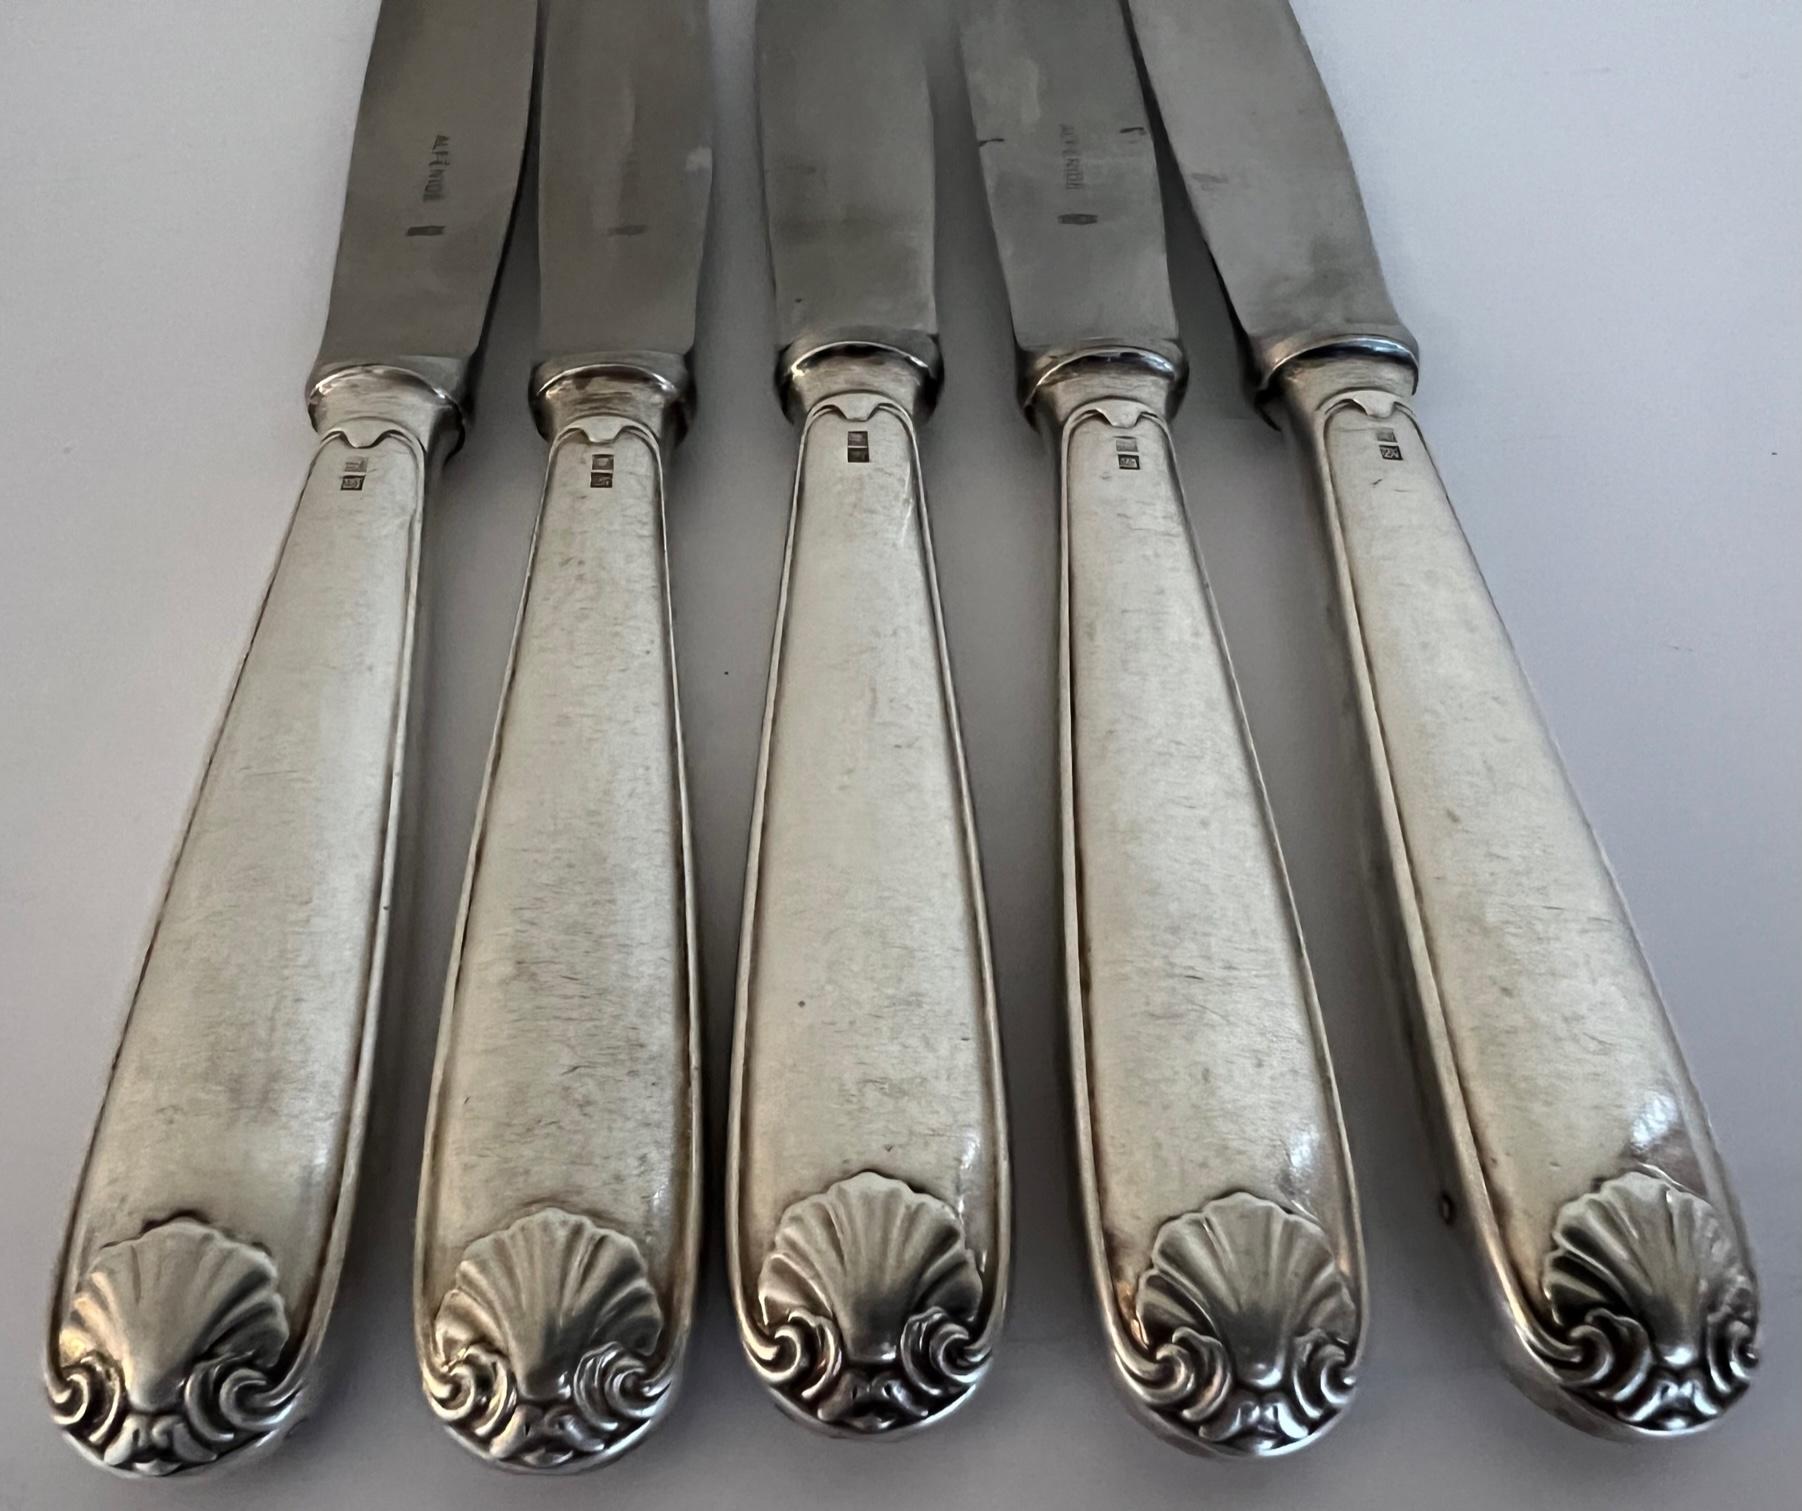 European French Silverplated Knives by Christofle -Set of 5 For Sale